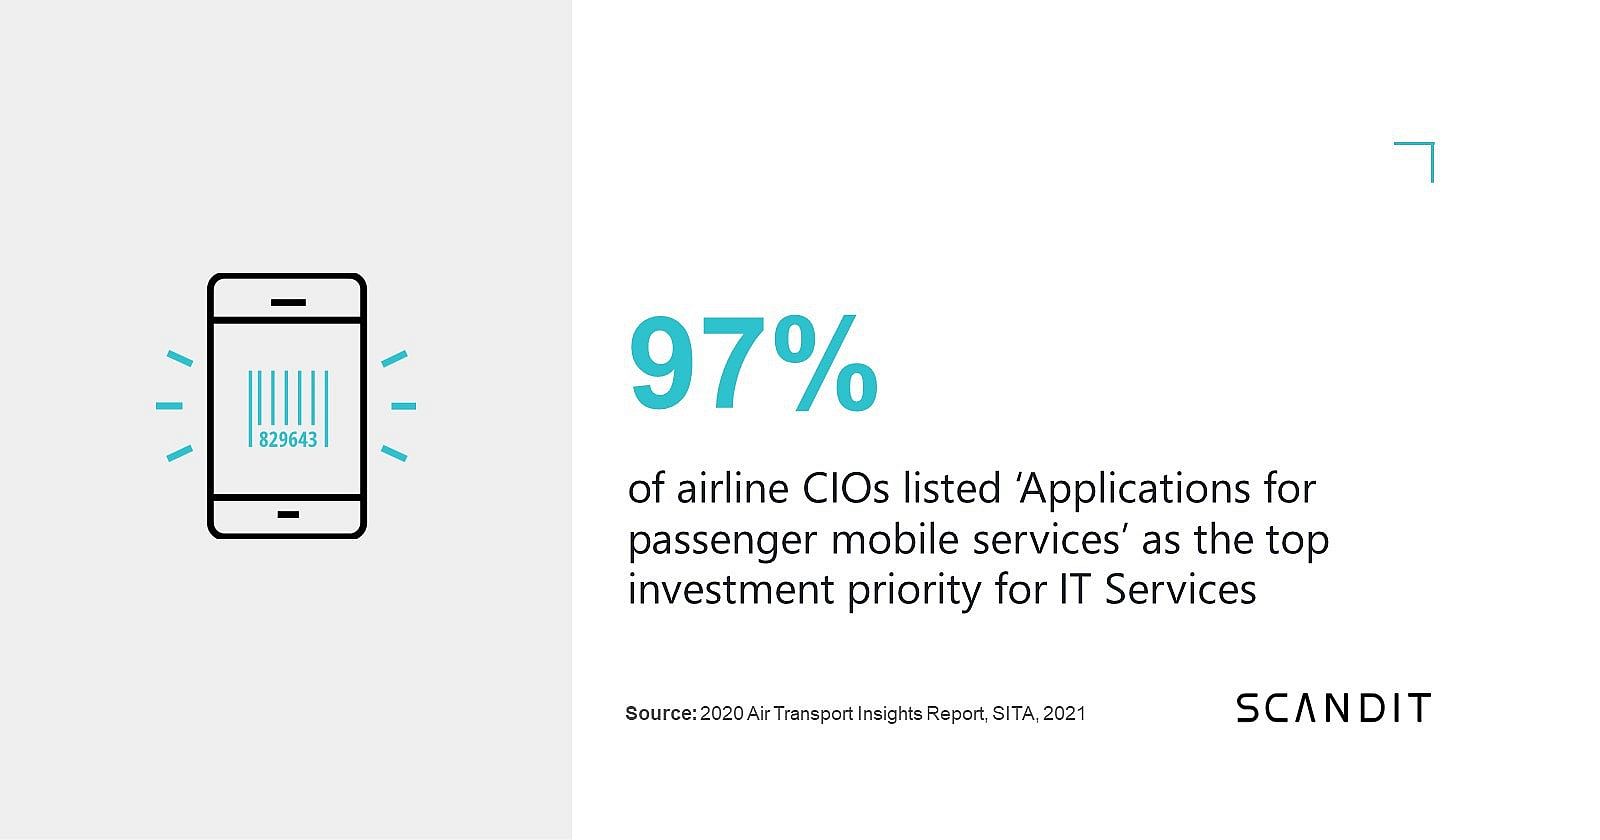 Airline IT investment priority